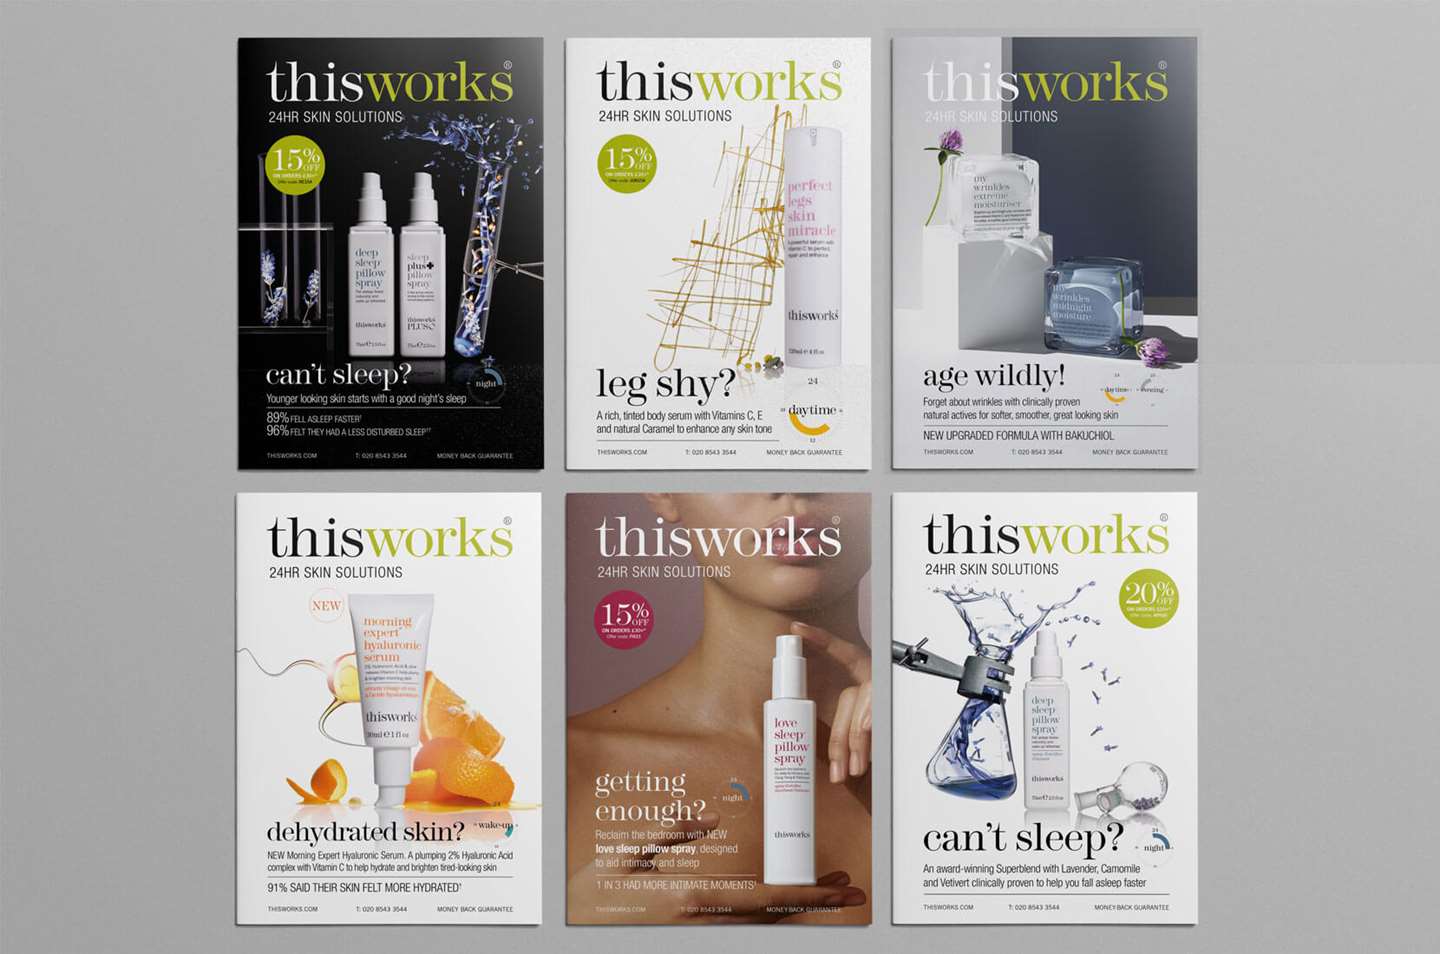 THISWORKS_Image_Large_cover2020-1.jpg